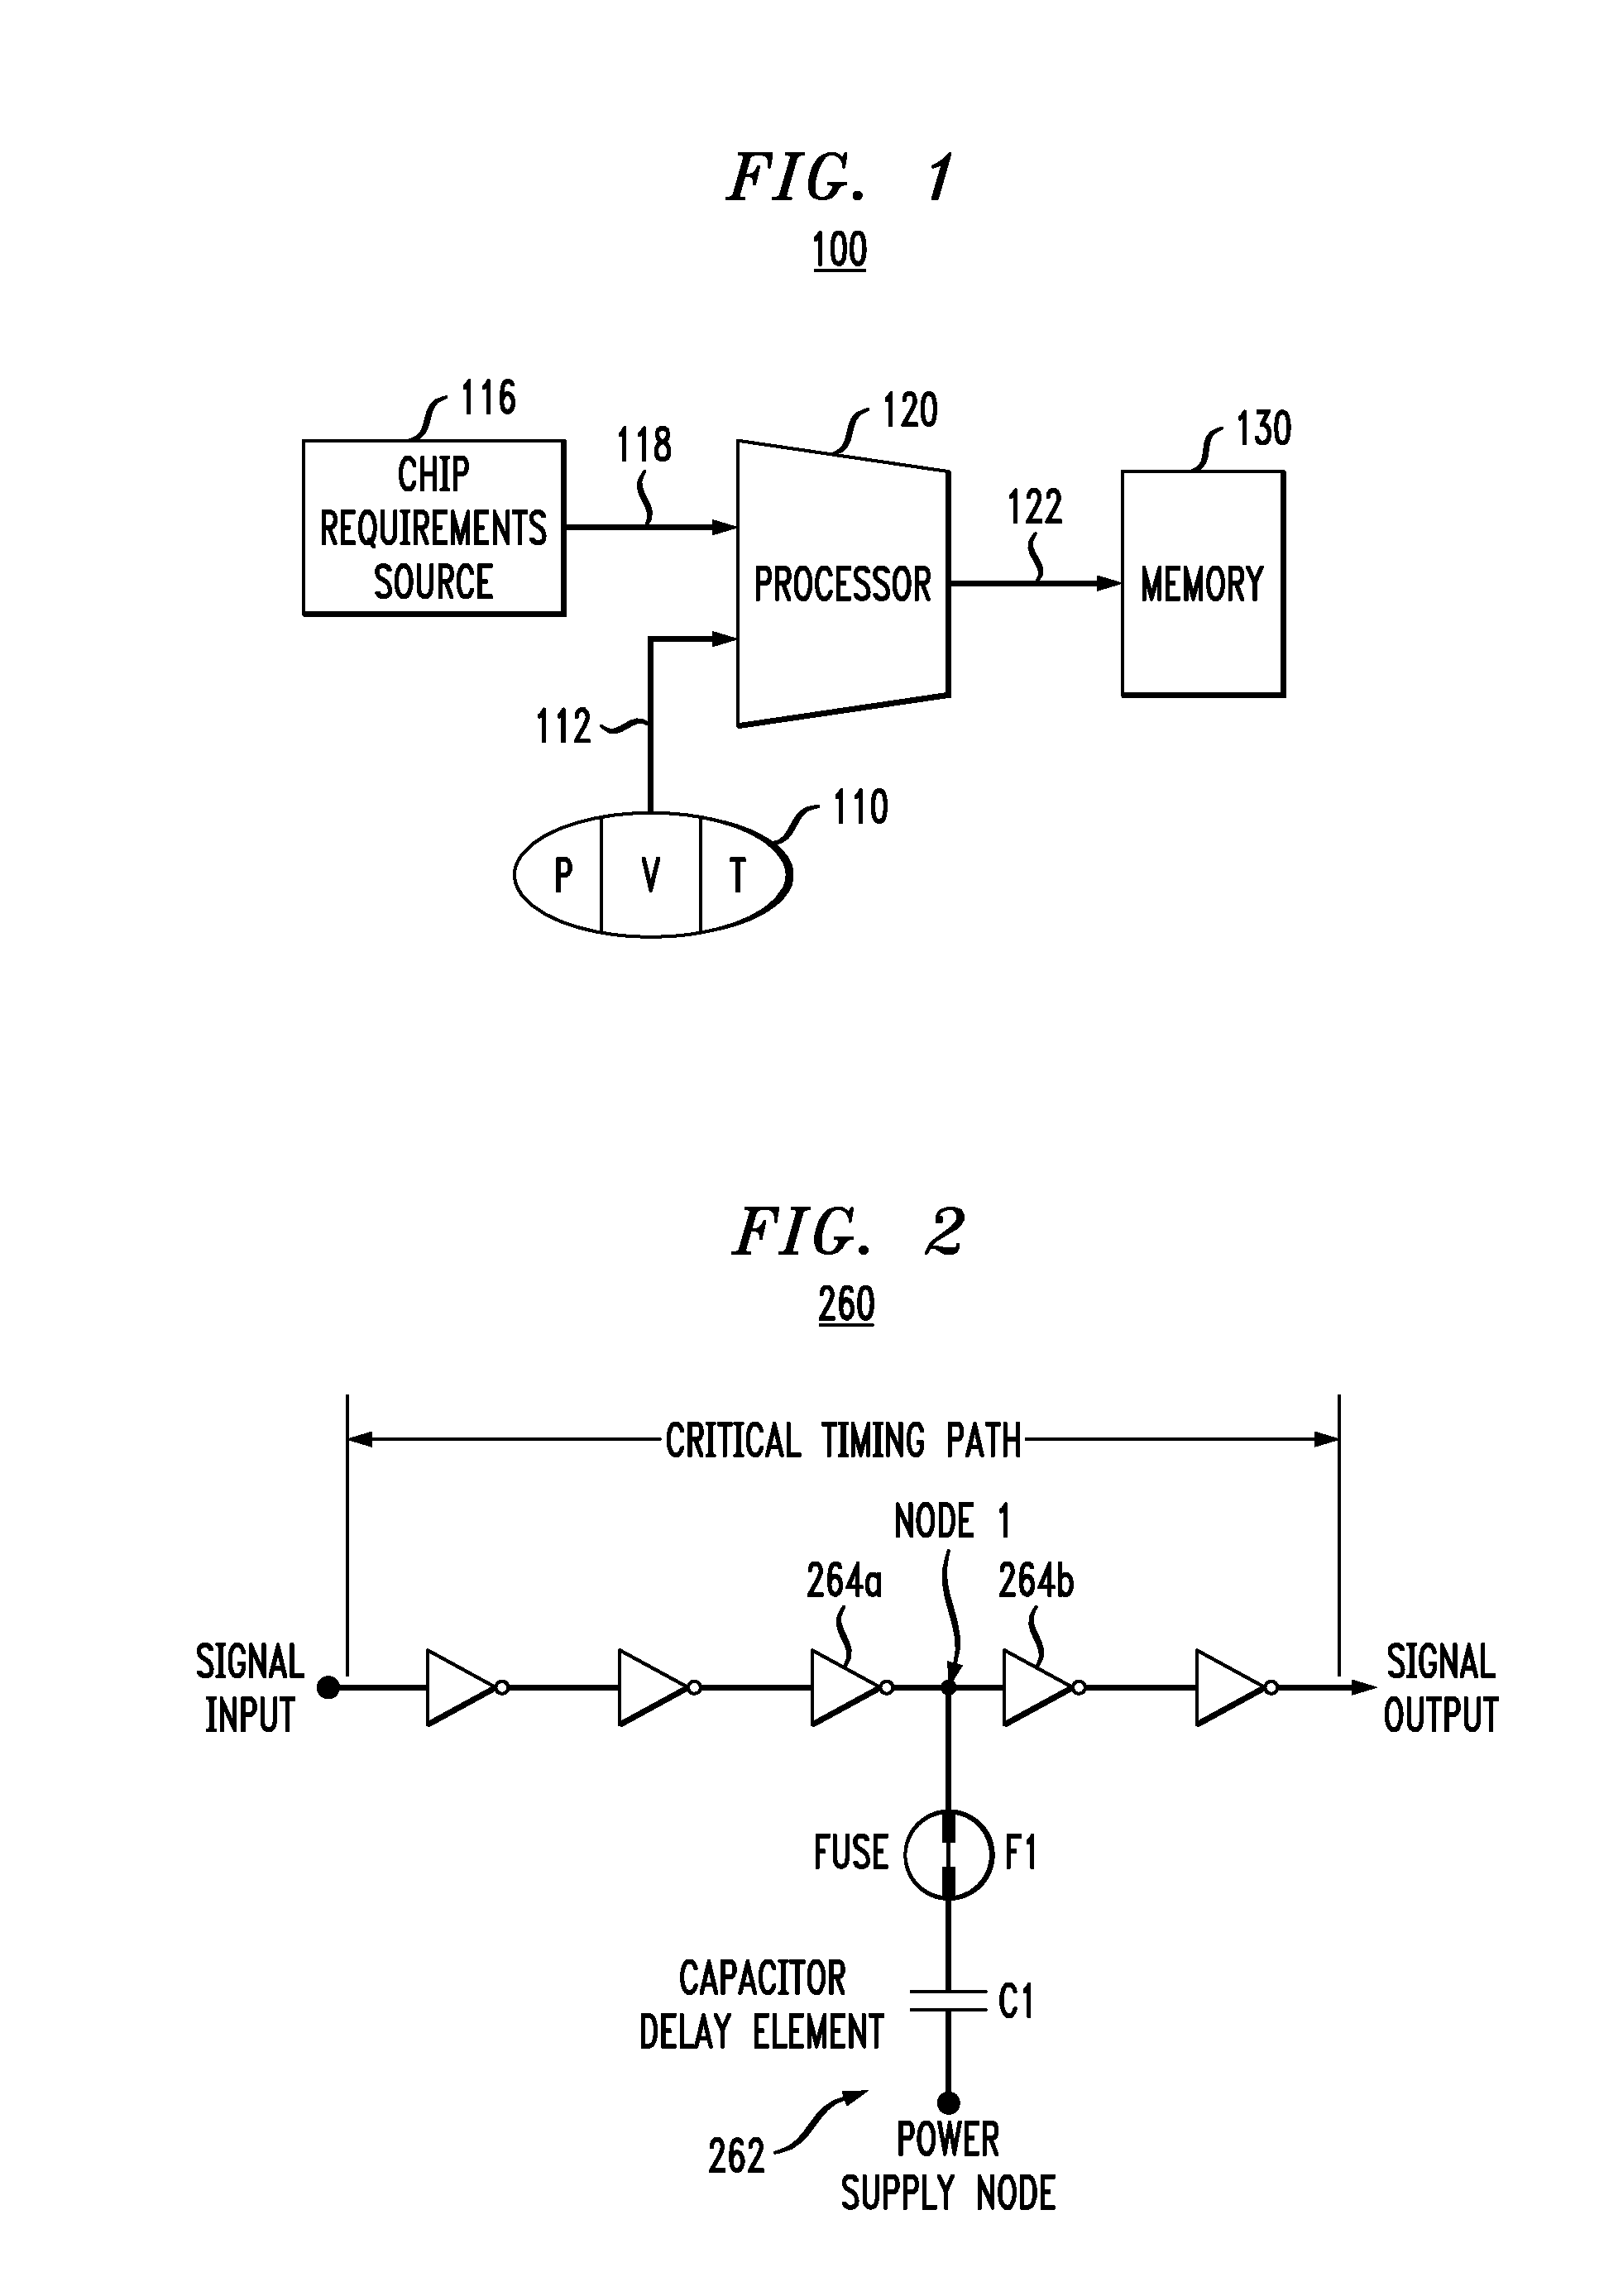 Integrated circuit having a memory with process-voltage-temperature control